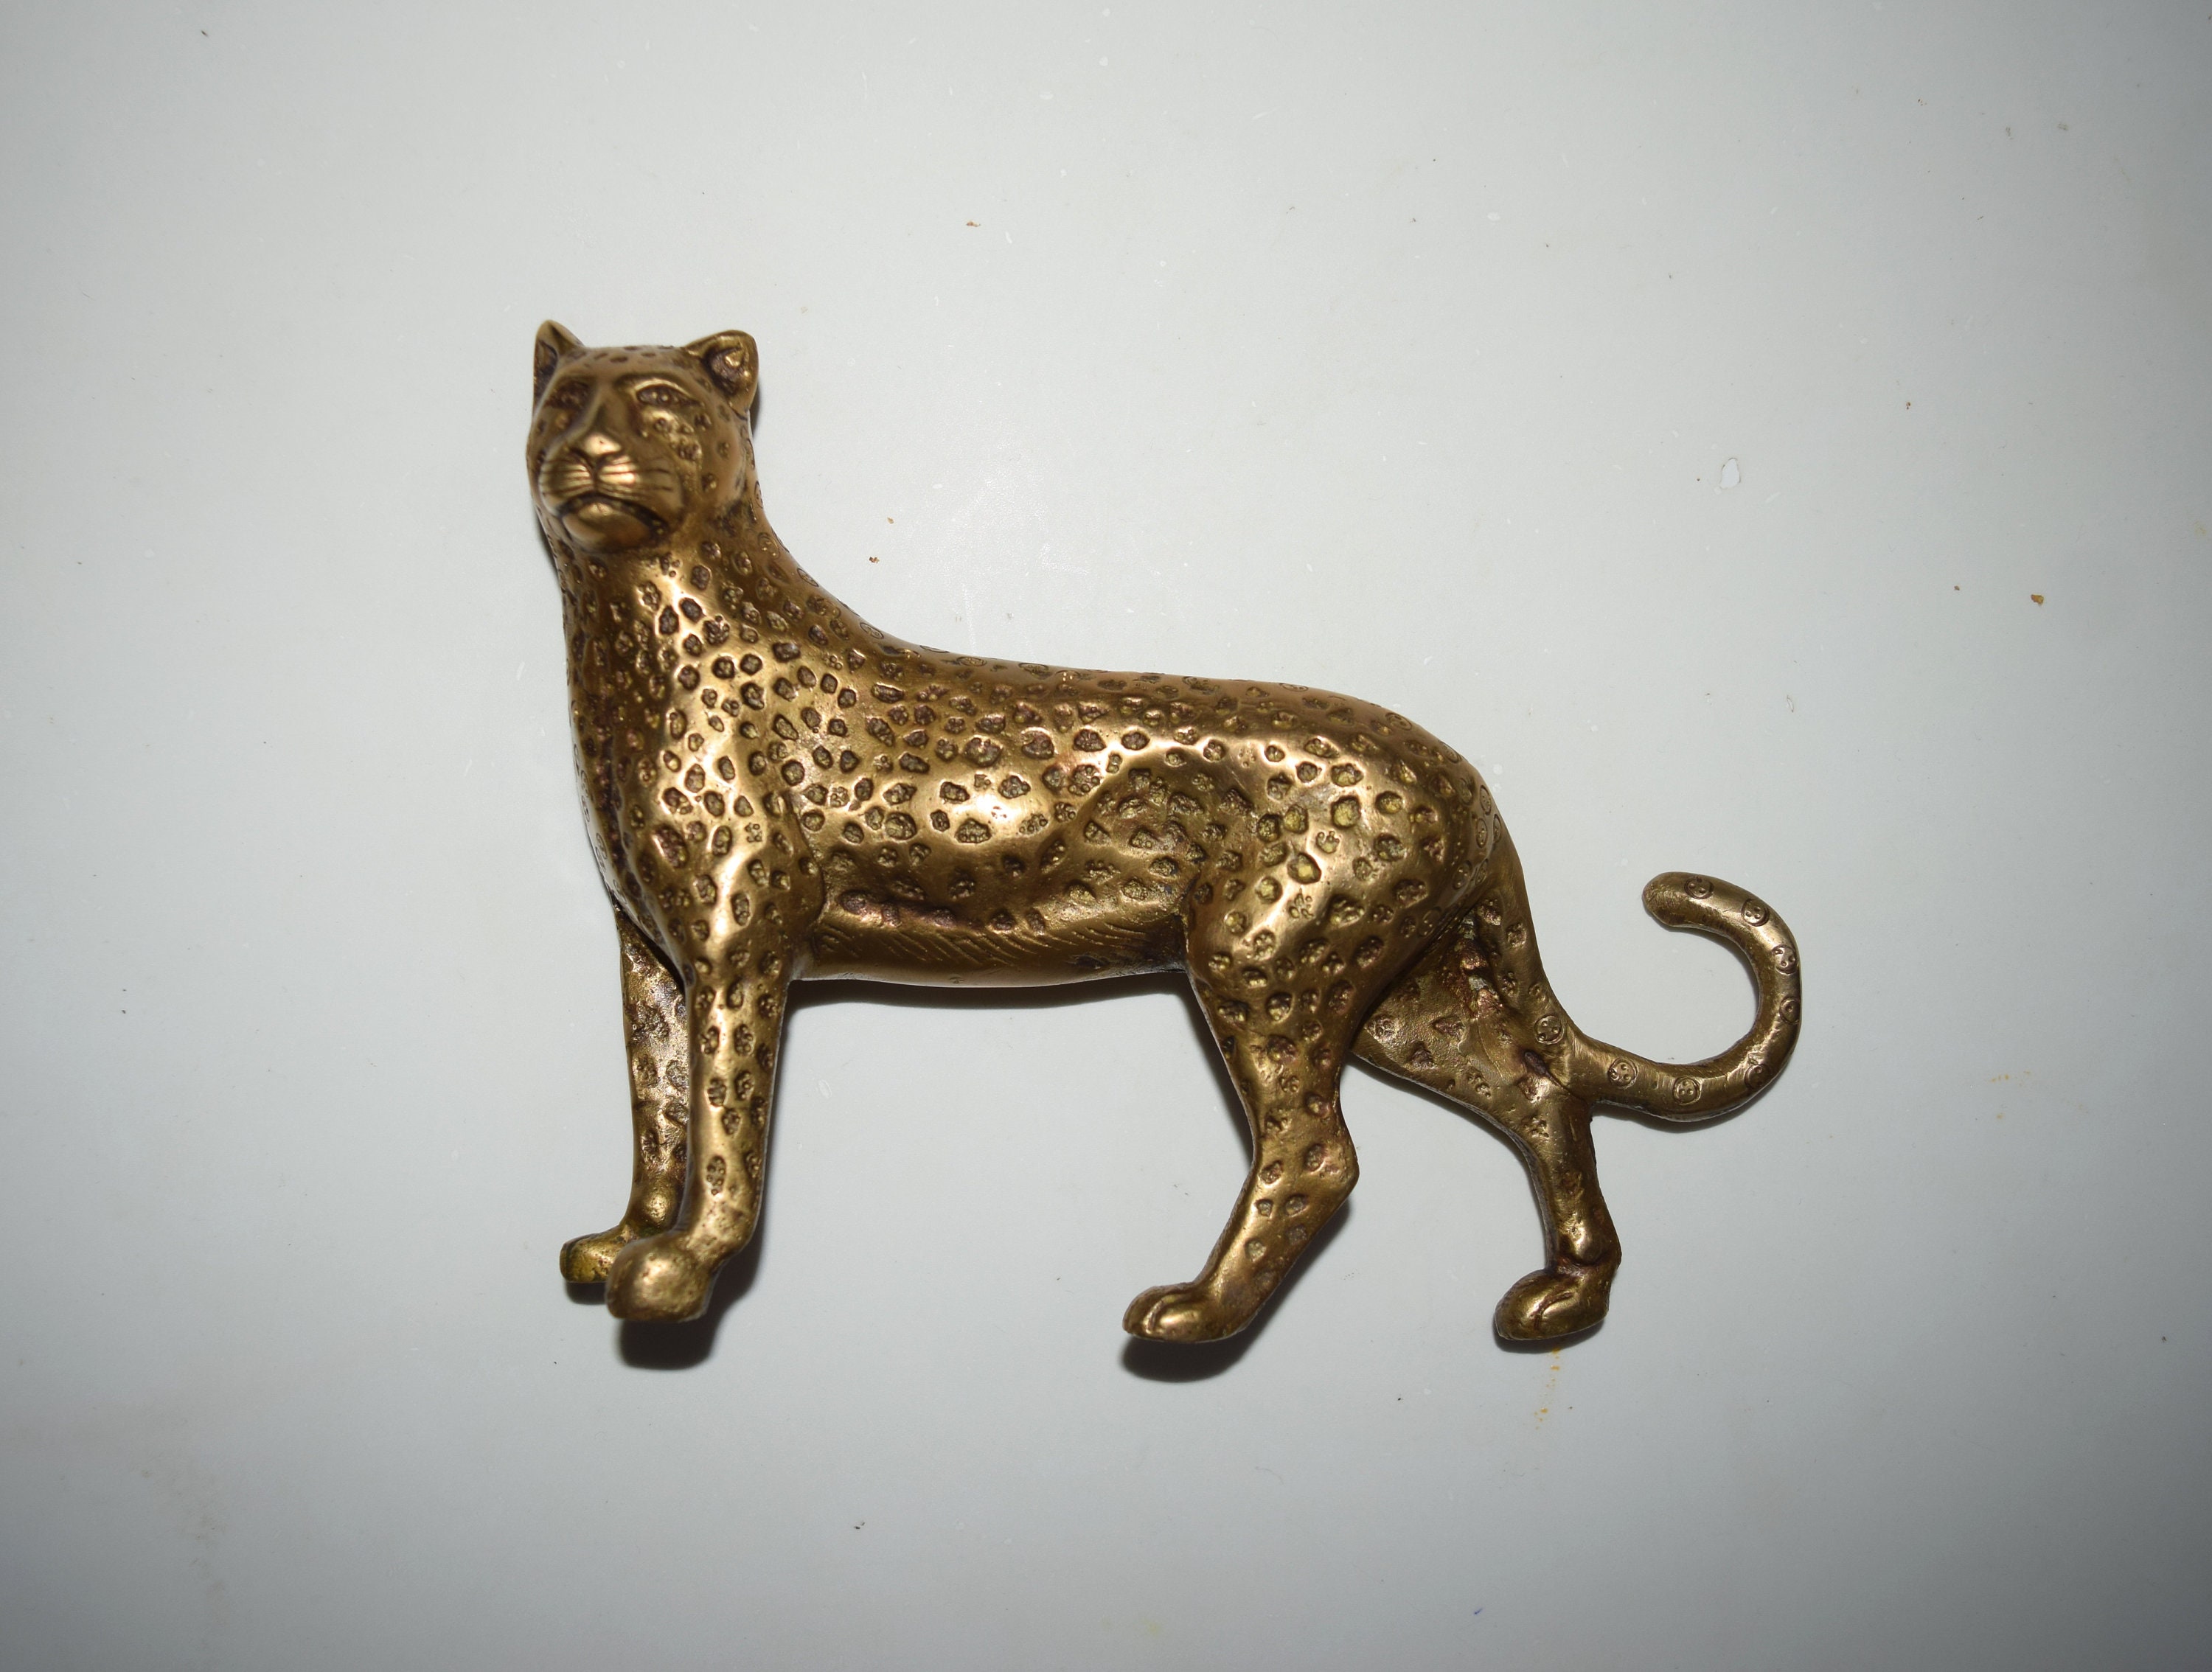 Brass Leopard Statue in Golden Color Rare Metal Crafts Decorative Panther  Sculpture Office Desk Table Décor Weight 1.360 KG Approx. -  Norway